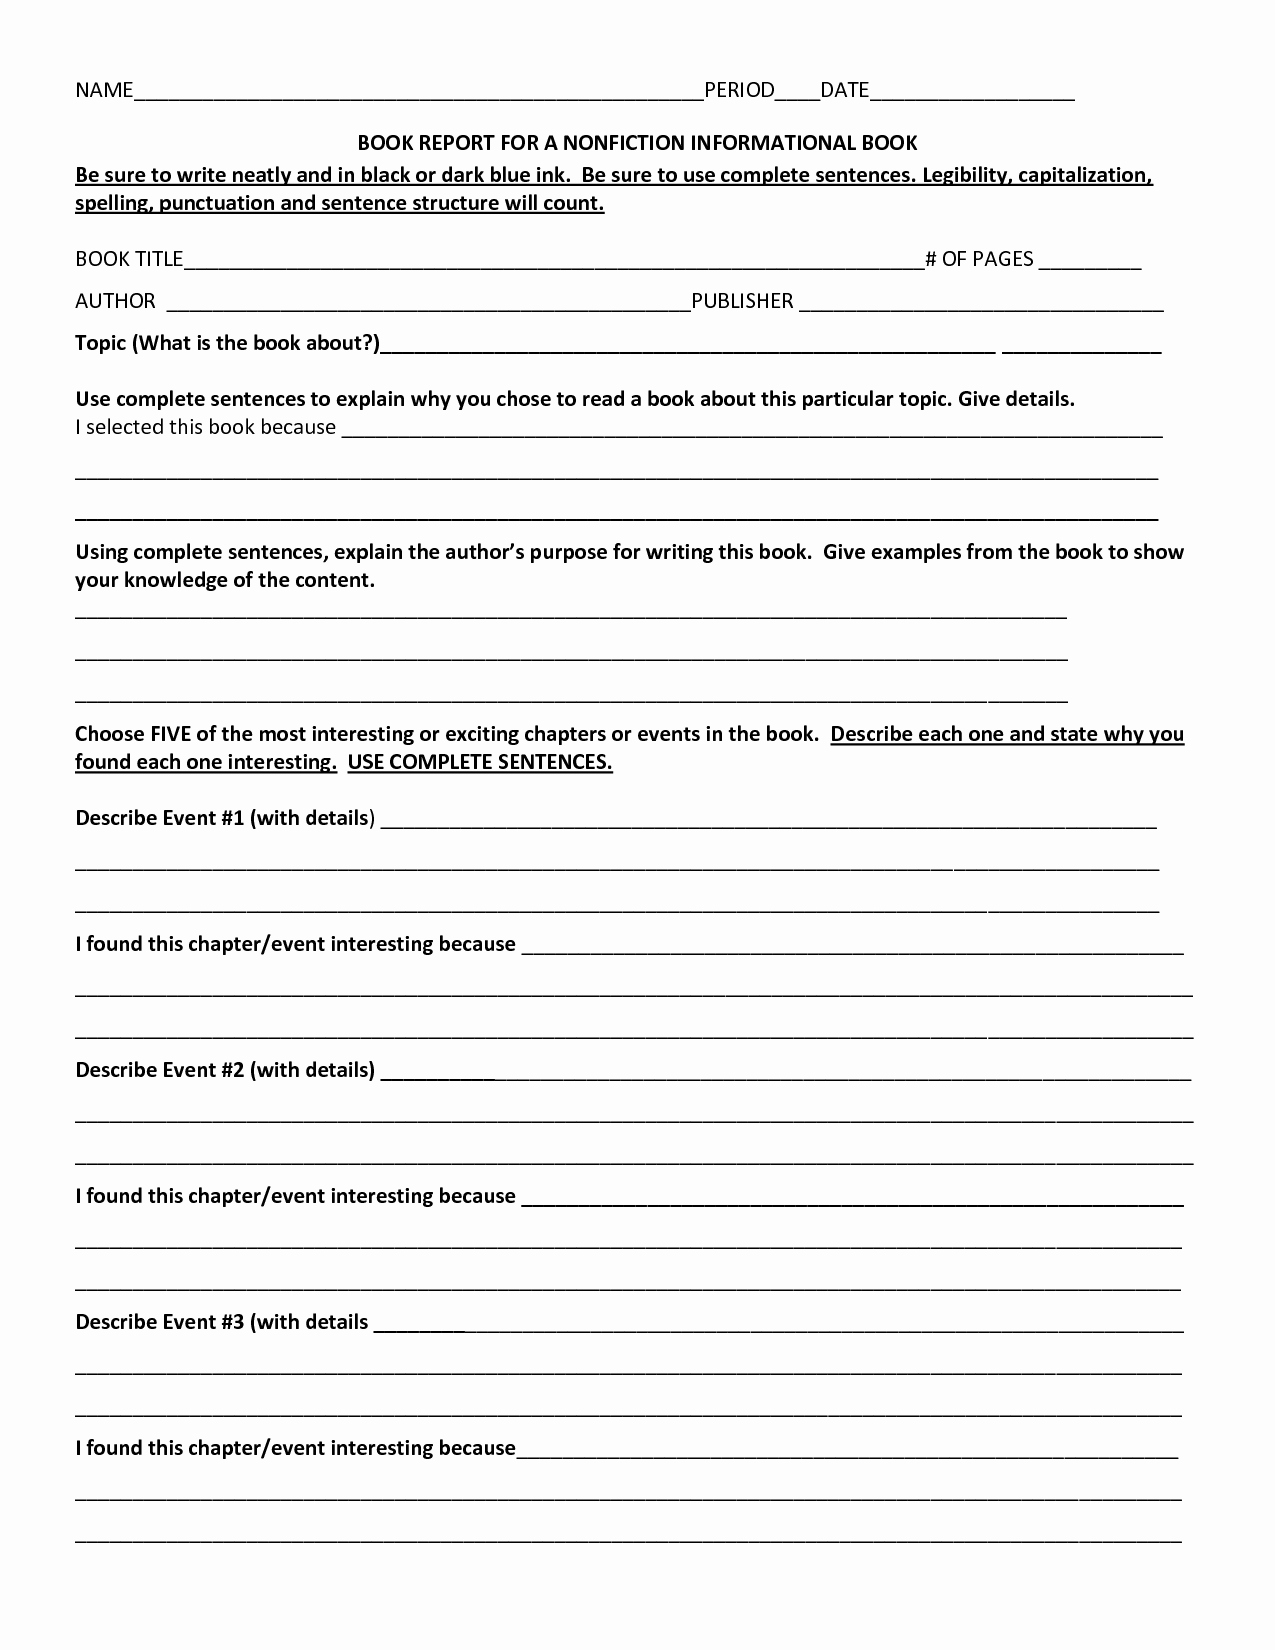 Book Report Outline Template Fresh Printable Book Report forms for 4th Grade 6 Best Images